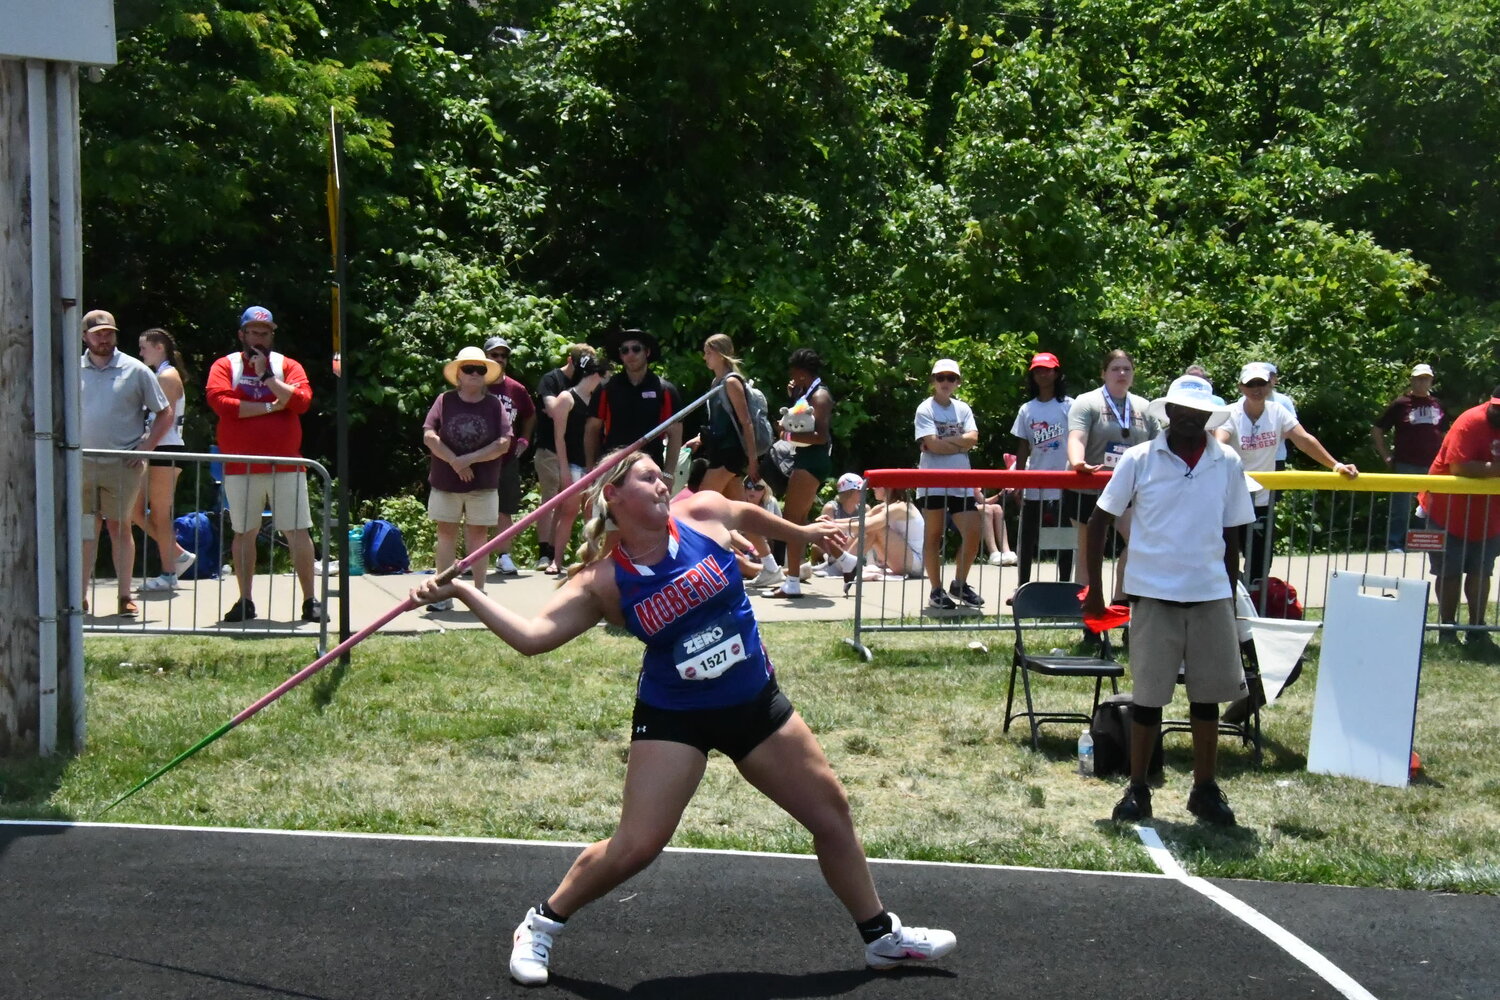 Moberly's Taylor Martin competes in the Class 4 javelin throw on Saturday afternoon in Jefferson City. Martin placed ninth in the discus and 11th javelin at state.